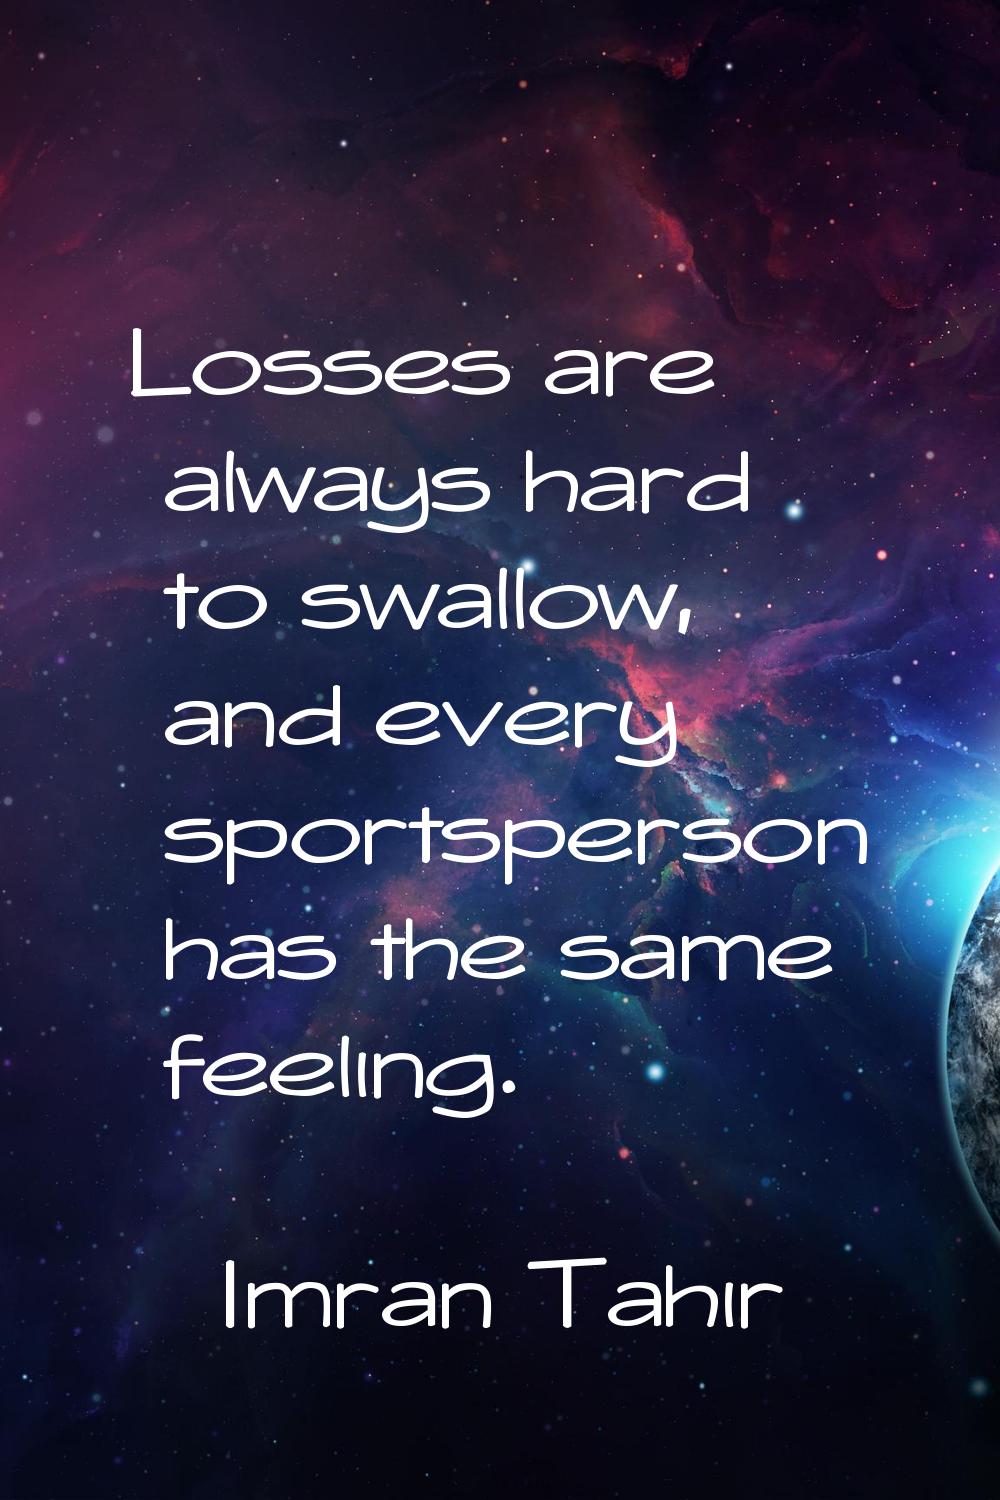 Losses are always hard to swallow, and every sportsperson has the same feeling.